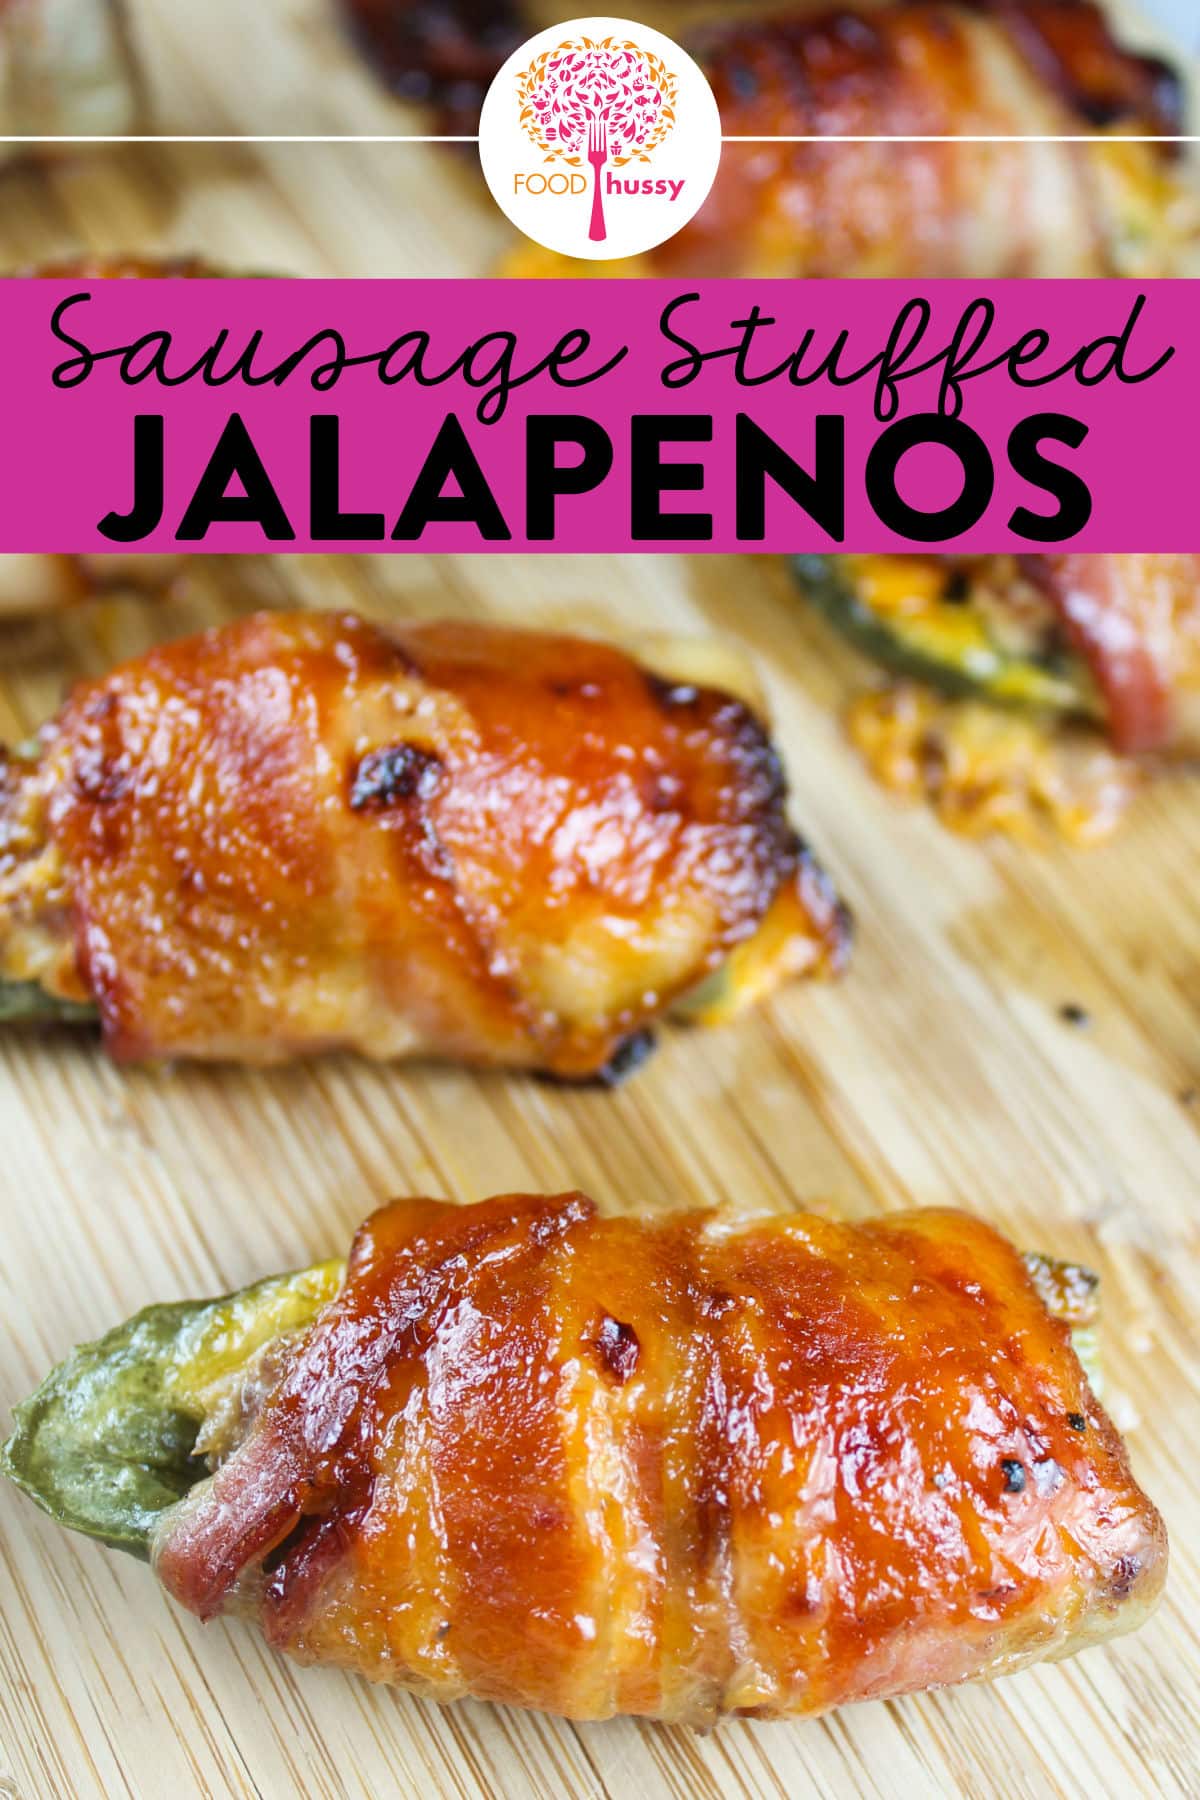 These Sausage Stuffed Jalapenos wrapped in bacon are finger lickin', lip smackin' good! Jalapeno peppers filled with sausage, cream cheese and CoJack cheese - then wrap it in bacon - I promise you're going to eat them ALL!!!!!  via @foodhussy